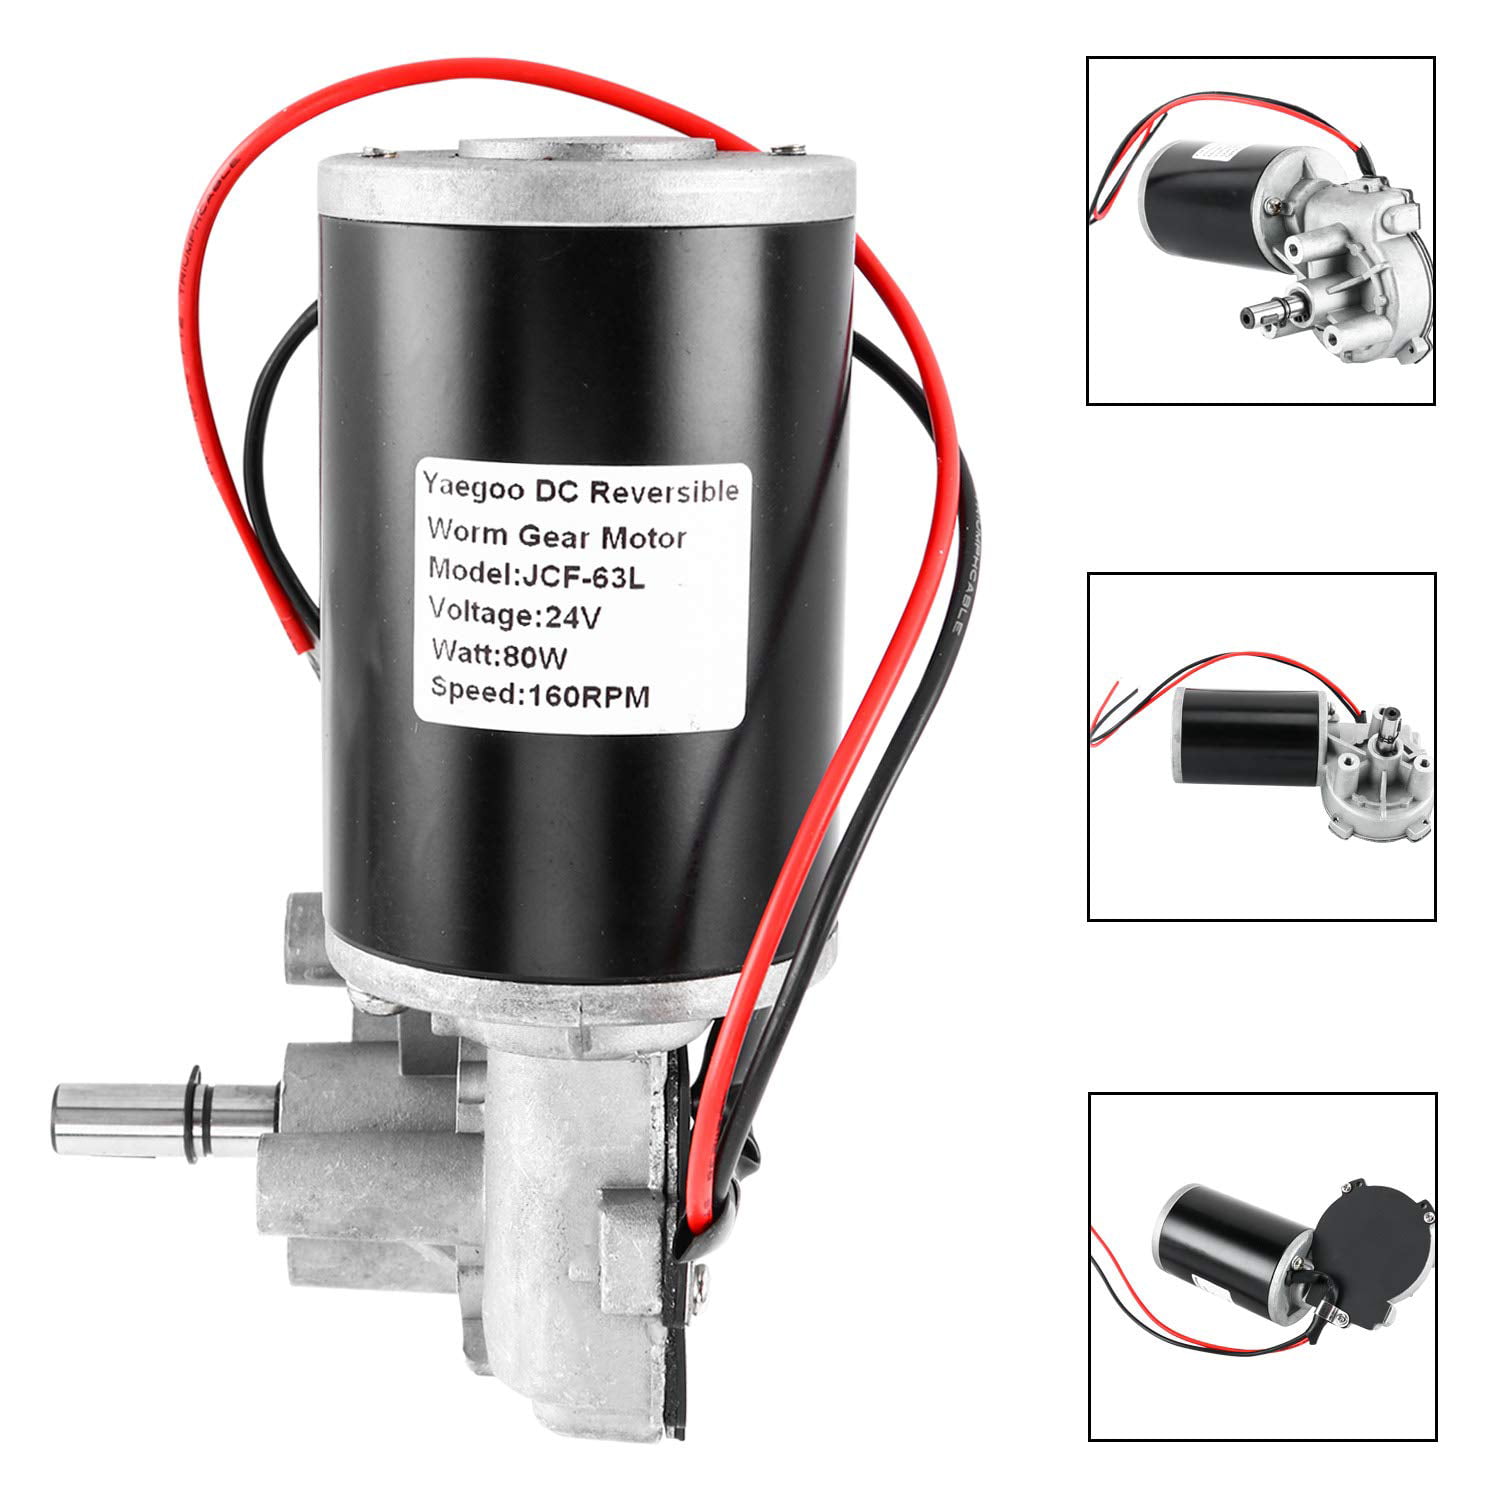 24V 300rpm DC 12V/24V High Torque Gear Motor Miniature Speed Reducing Gearbox Reversible Reducer Multiple Models for Grill Electronic Lock 